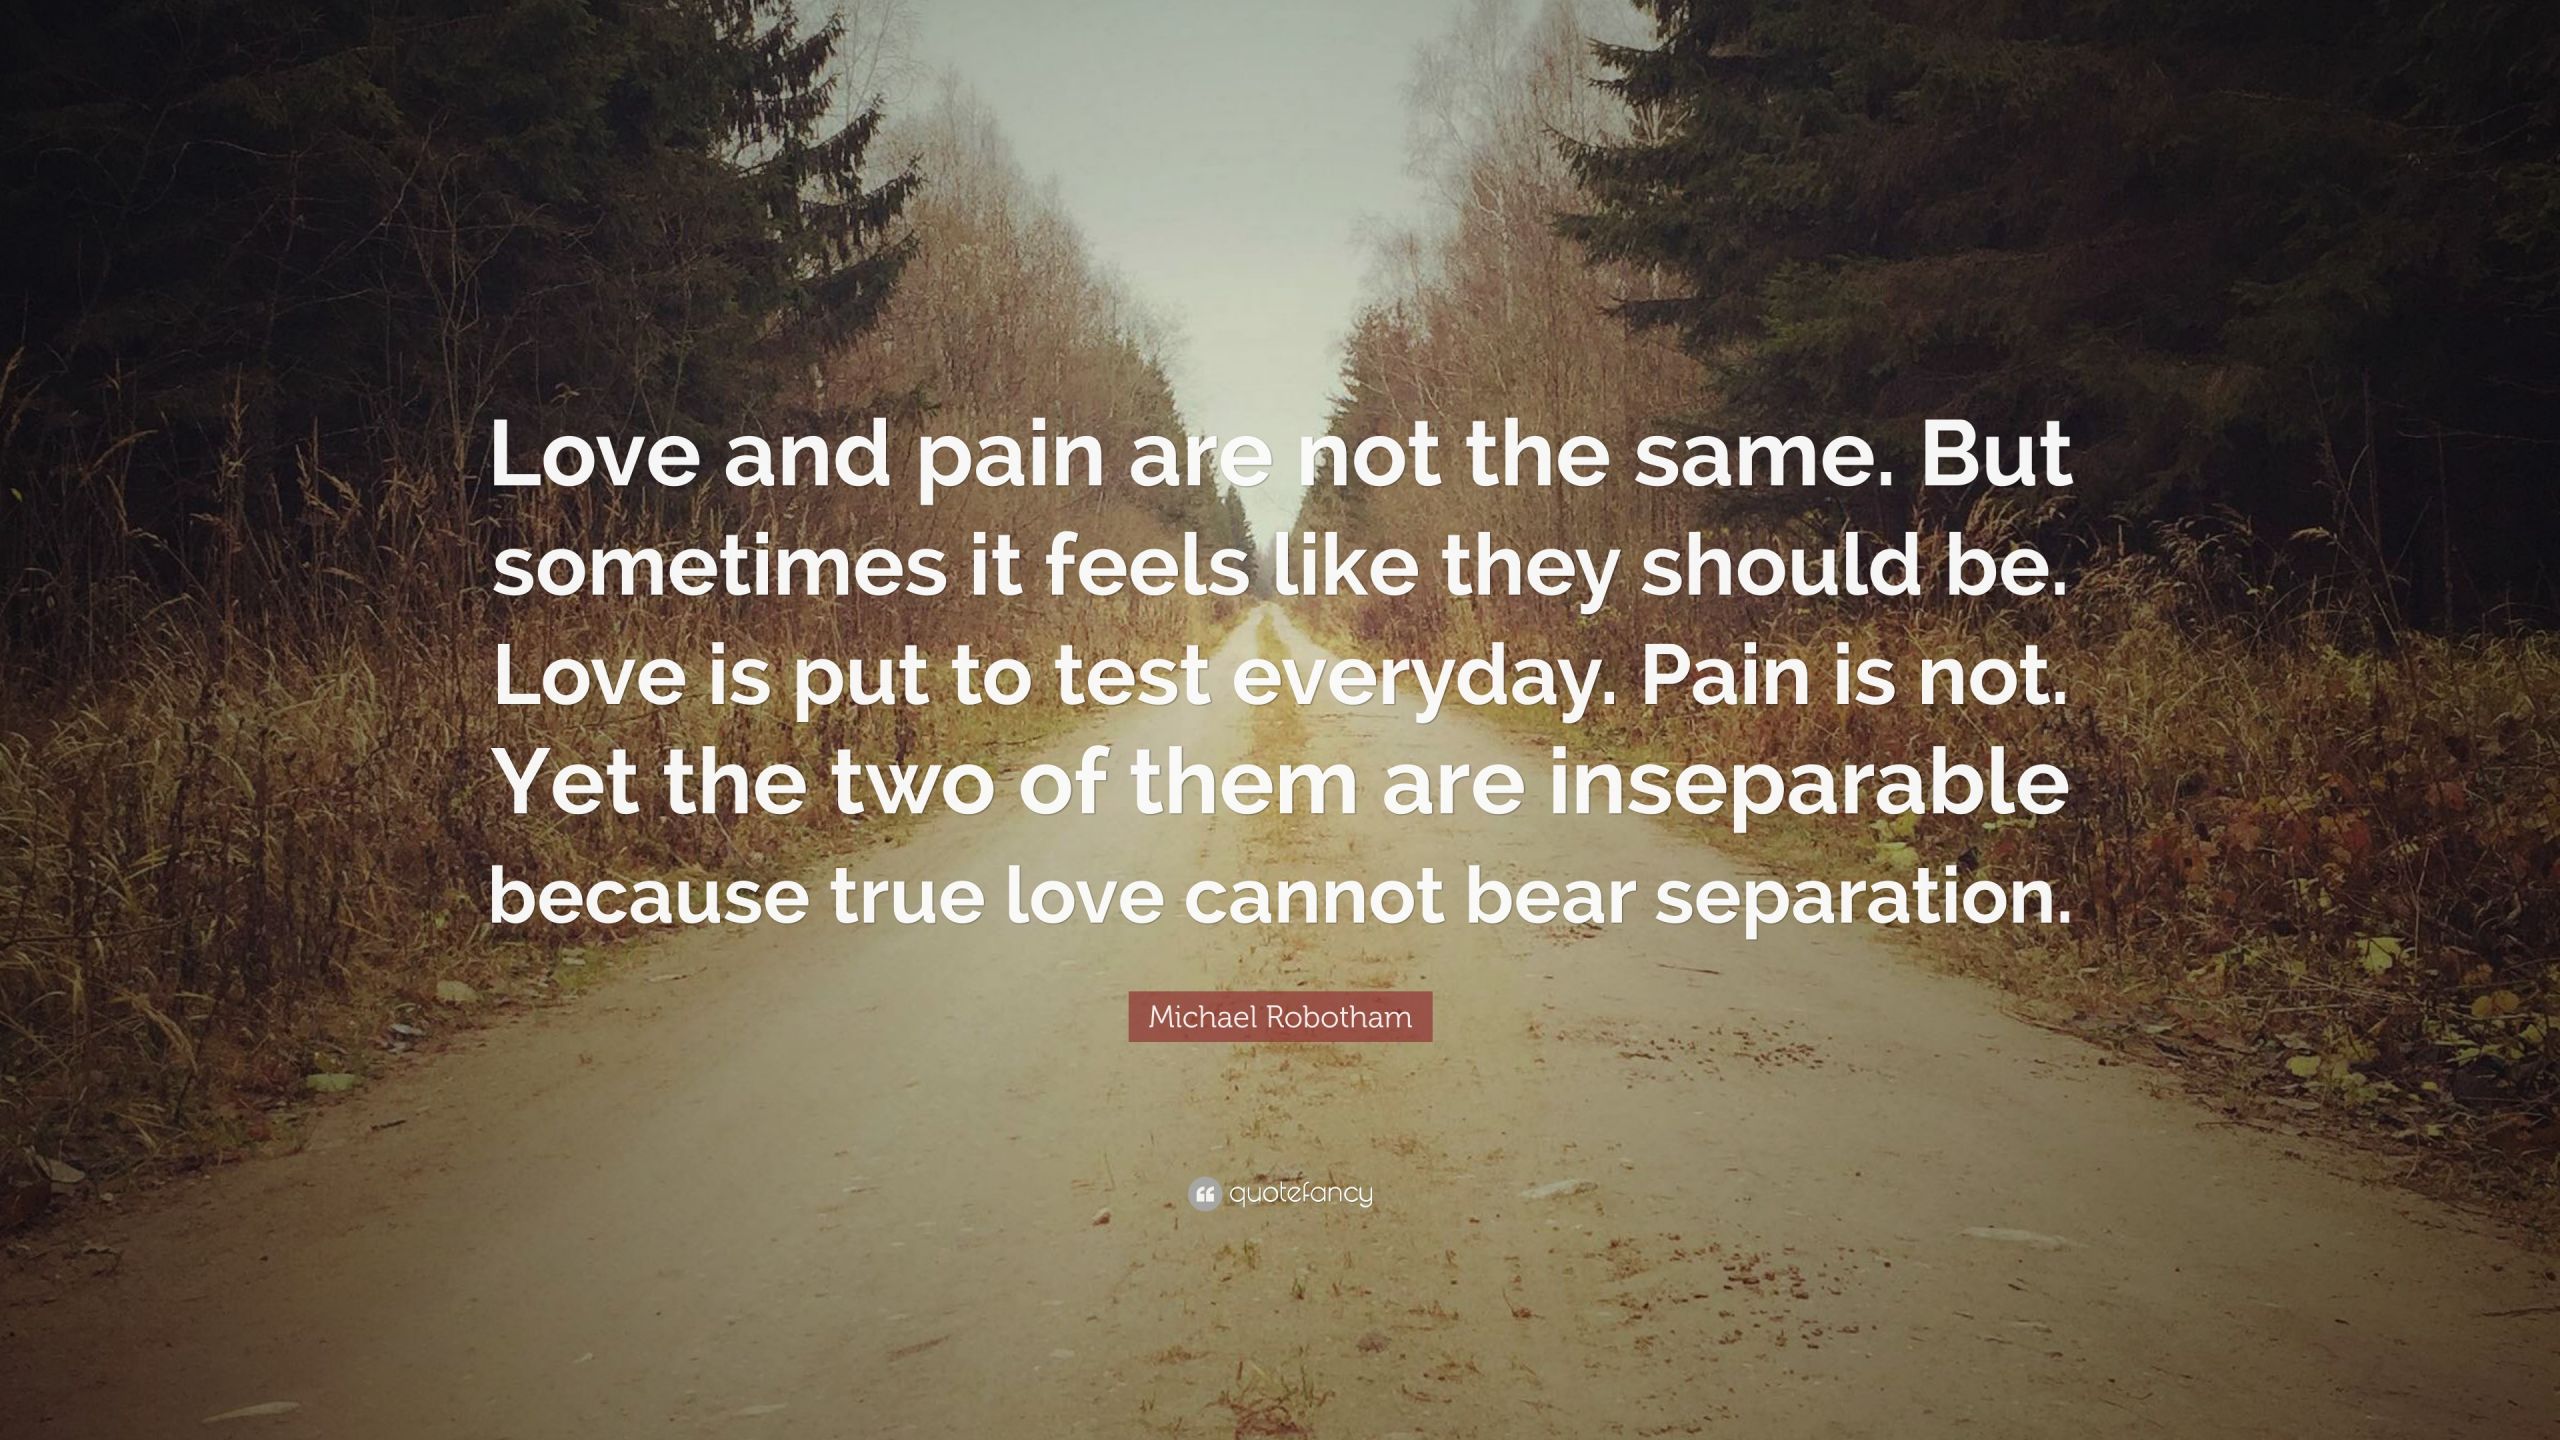 Quotes About Love And Pain
 Michael Robotham Quote “Love and pain are not the same